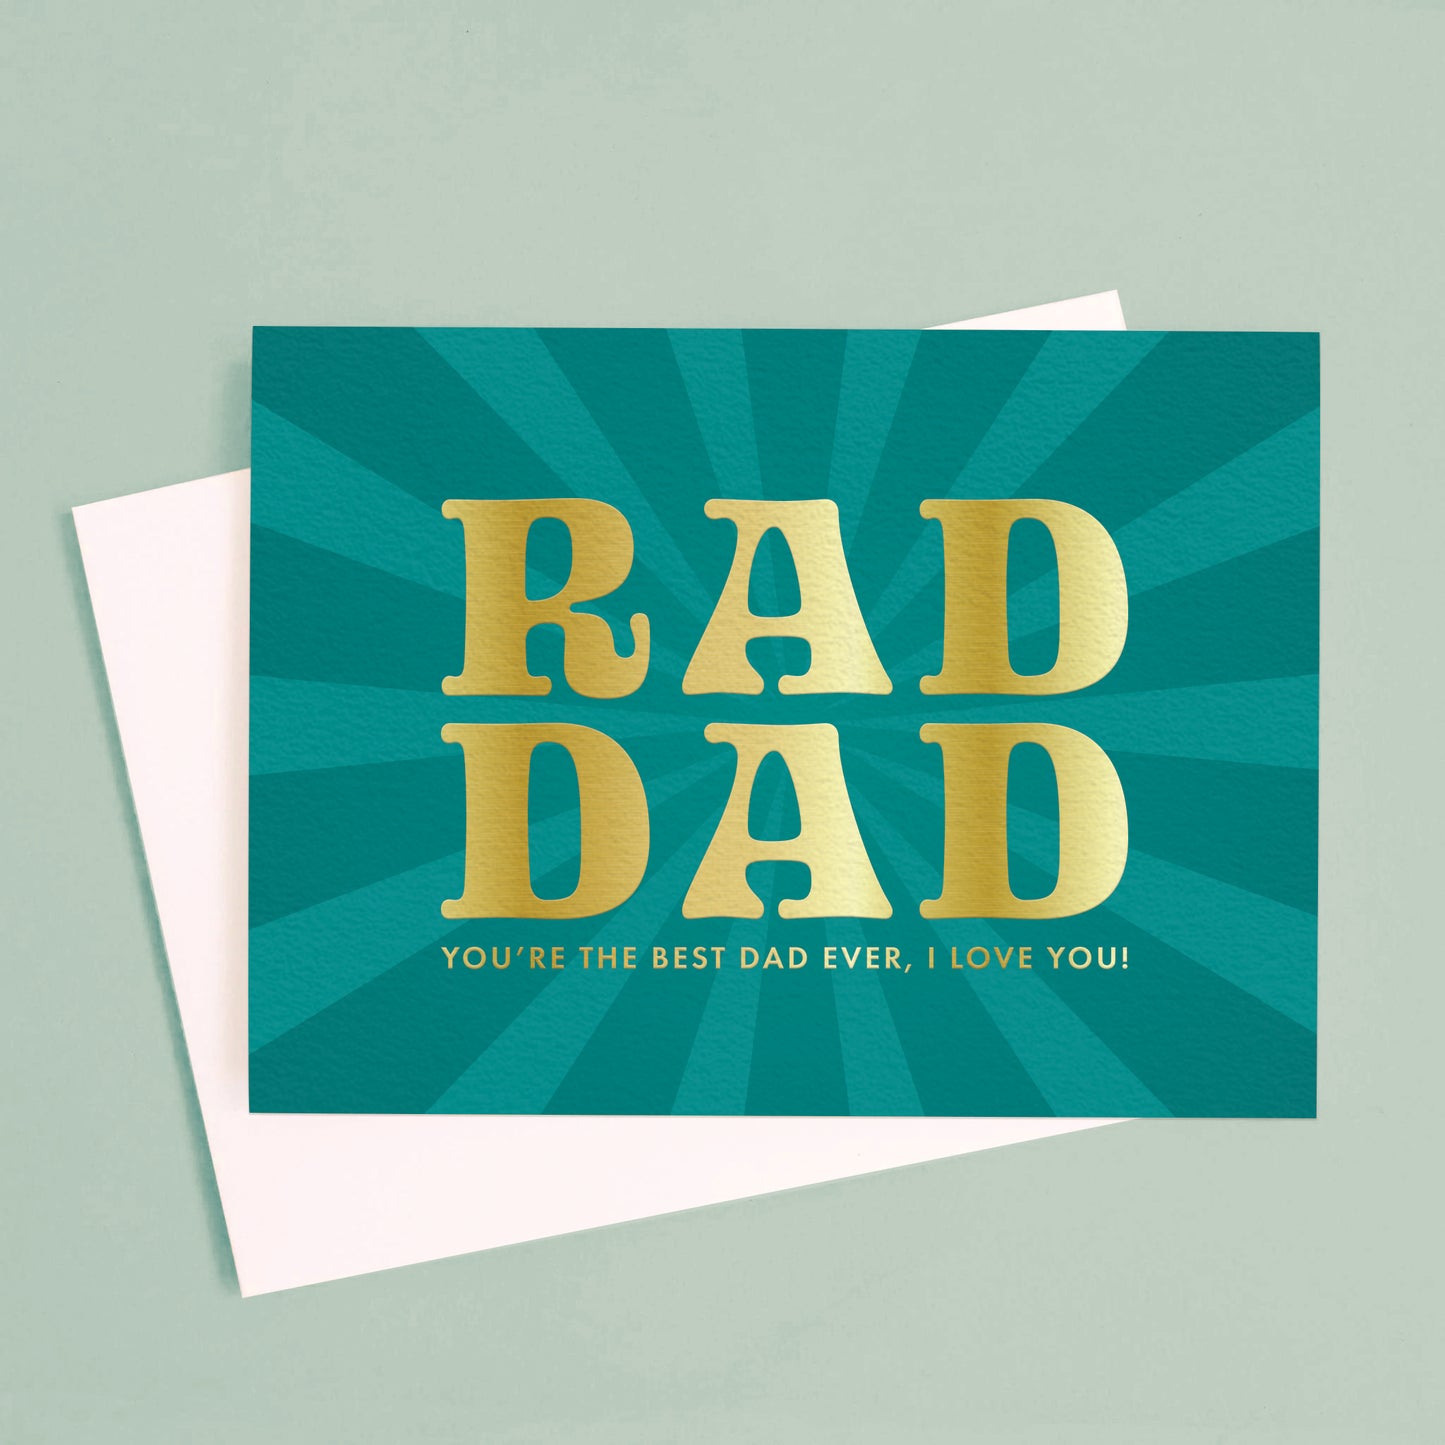 On a green background is a blue teal card with gold text that reads, "Rad Dad You're The Best Dad Ever, I Love You". 